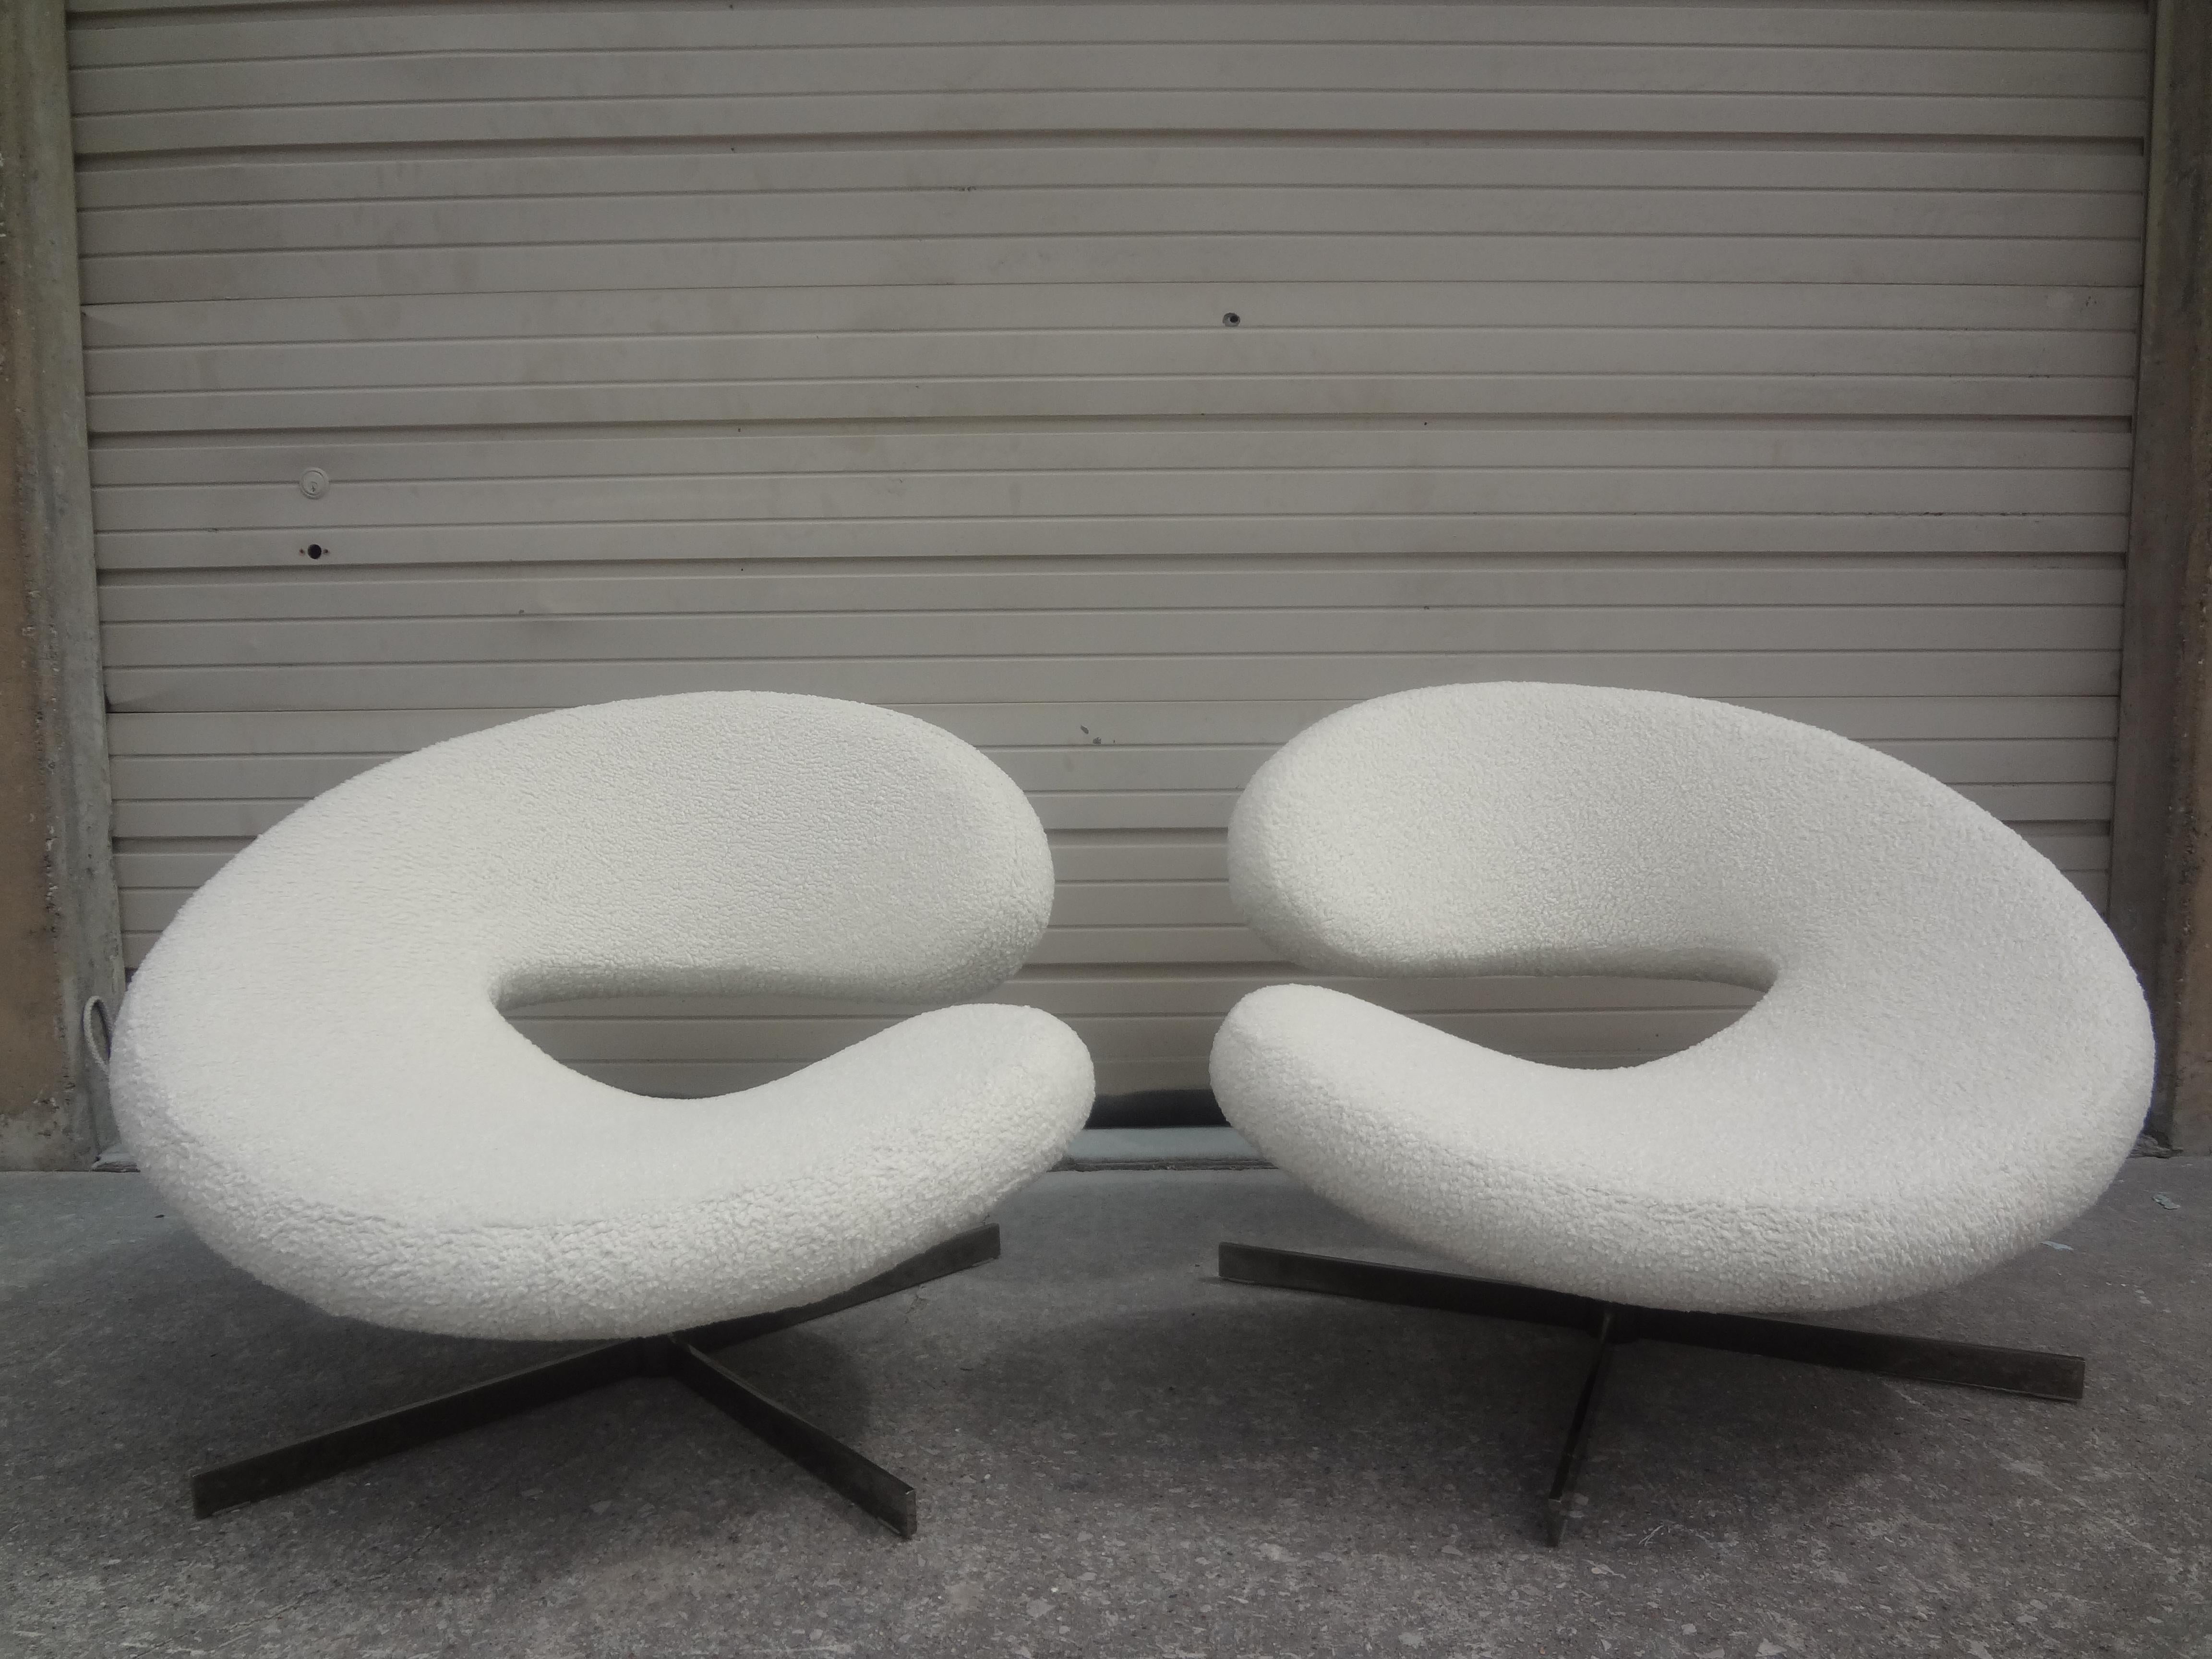 Sensational Pair of French Modernist sculptural swivel chairs by Roche Bobois. These stunning postmodern swivel chairs are a very unusual model, with chrome bases and a true pair, left and right. These rare French lounge chairs were taken down to